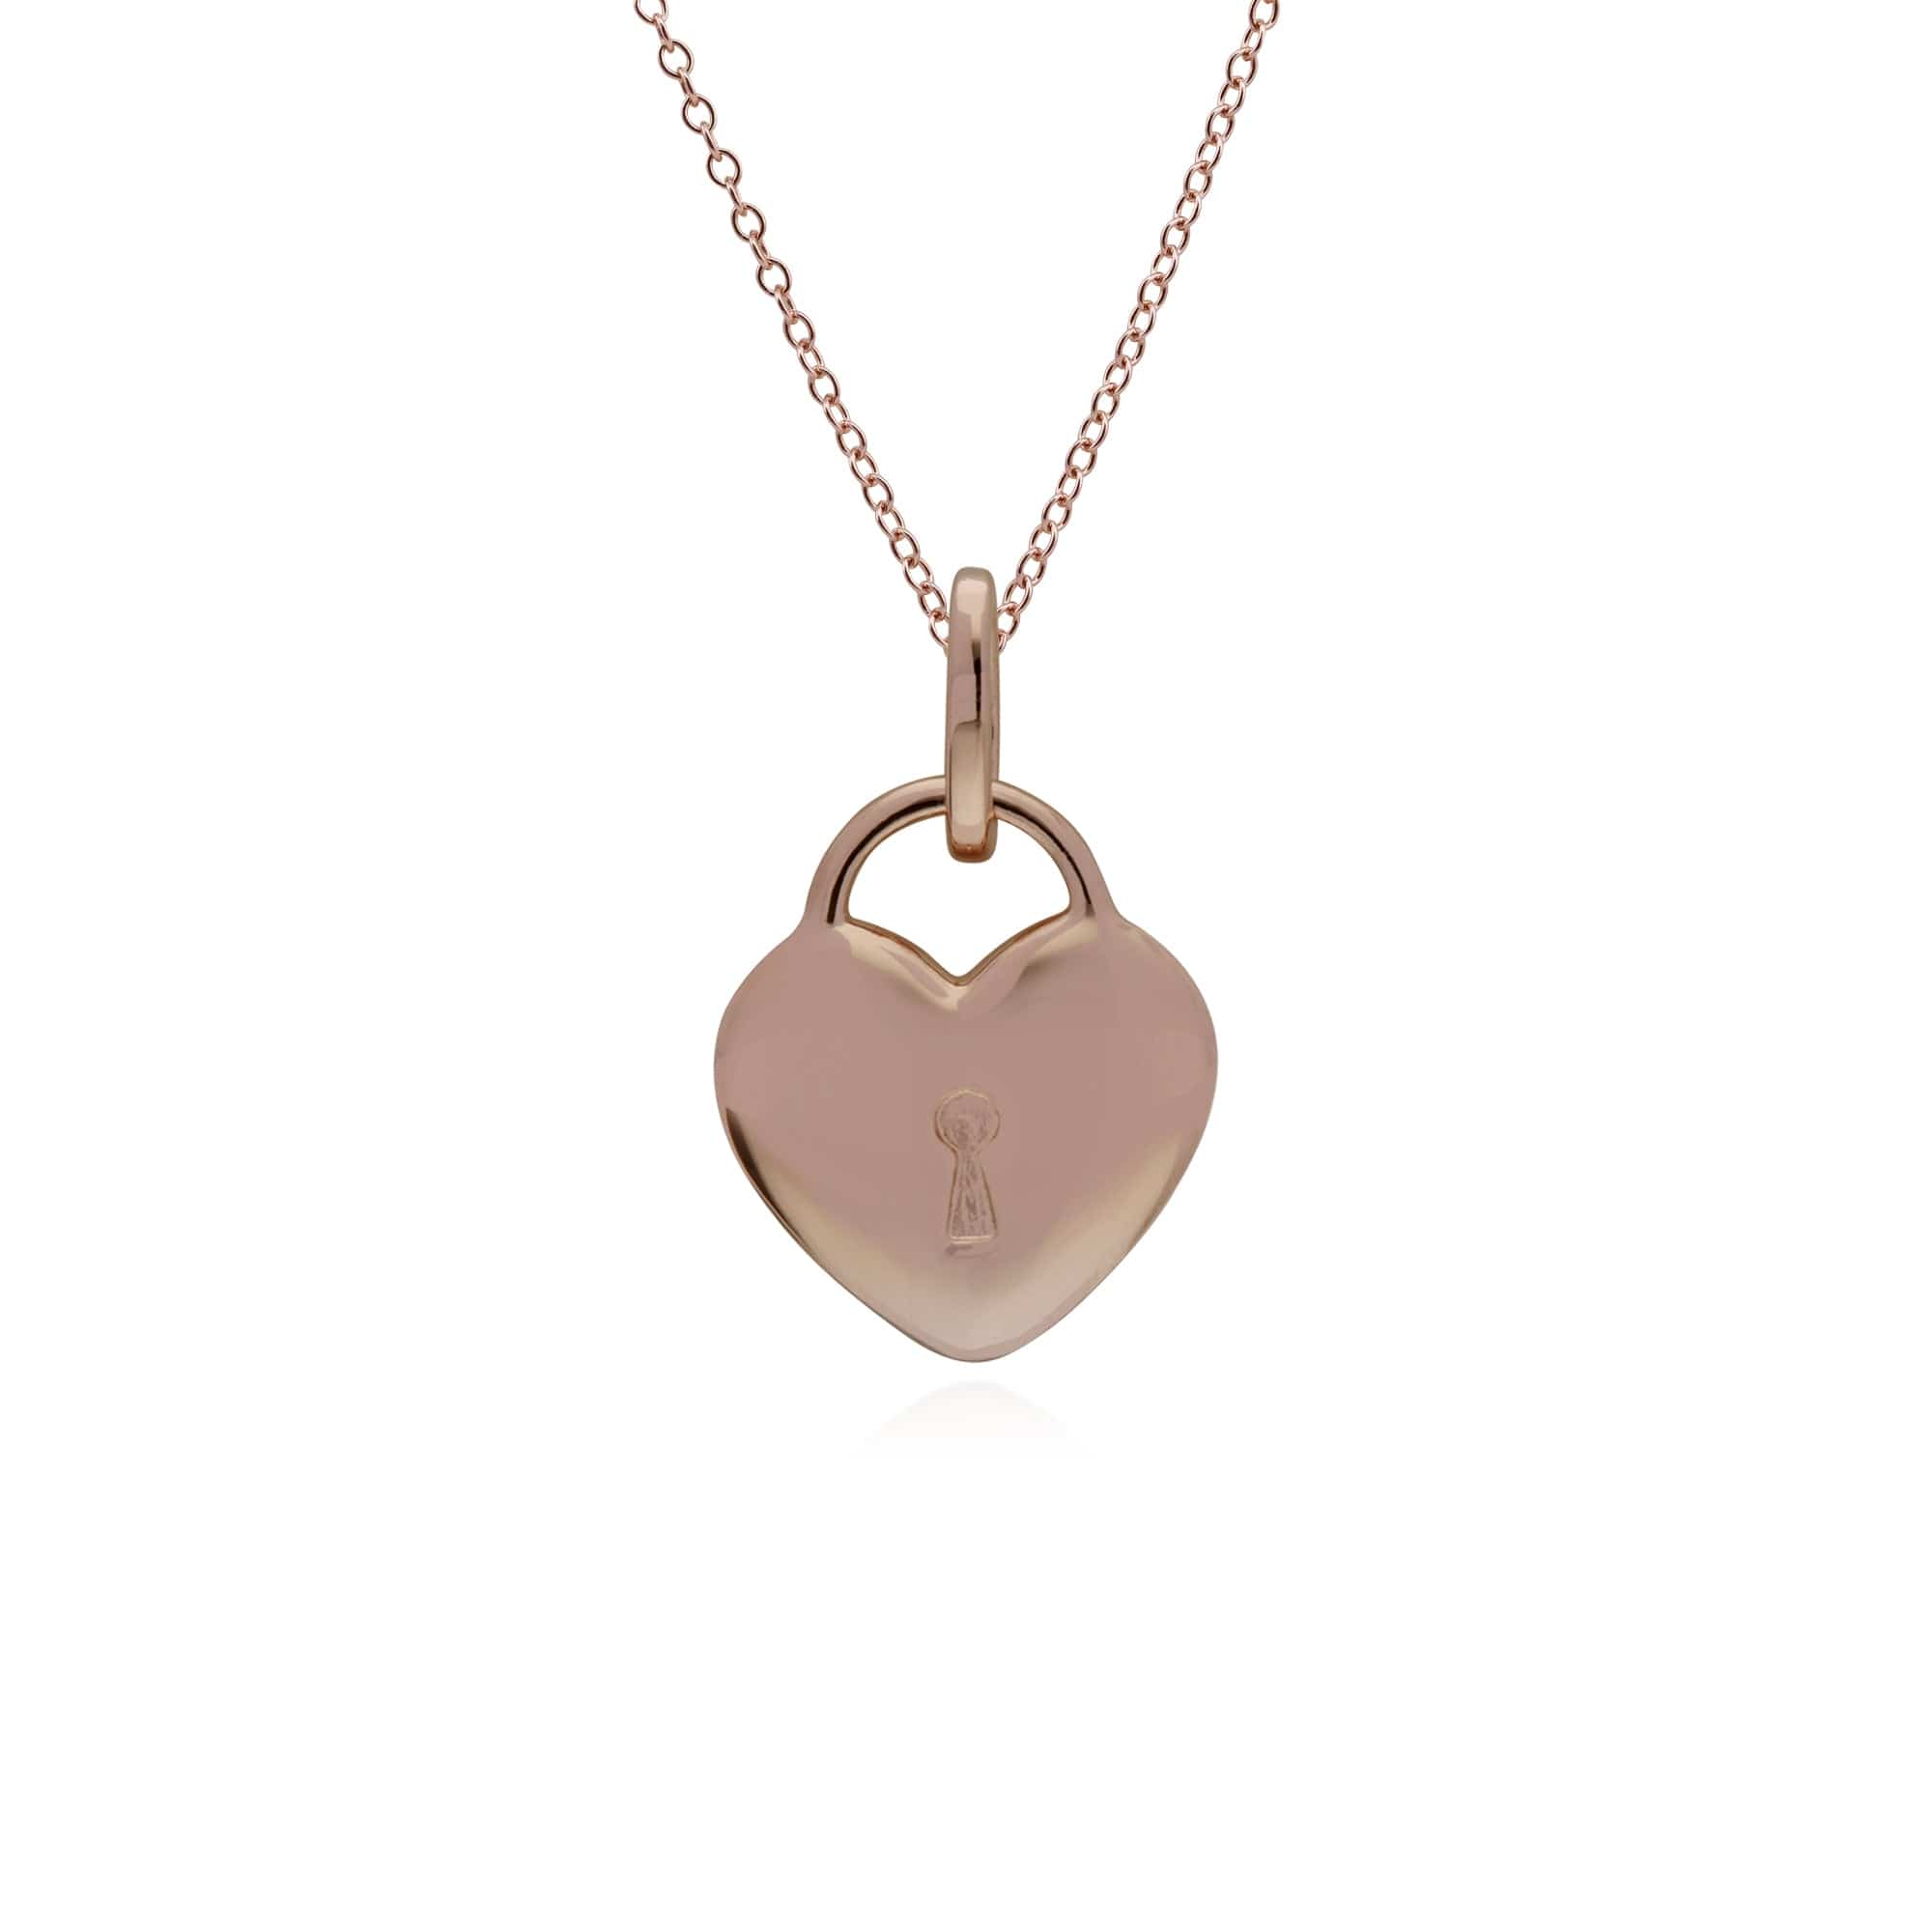 270P028603925-270P026901925 Classic Heart Lock Pendant & Jade Key Charm in Rose Gold Plated 925 Sterling Silver 3